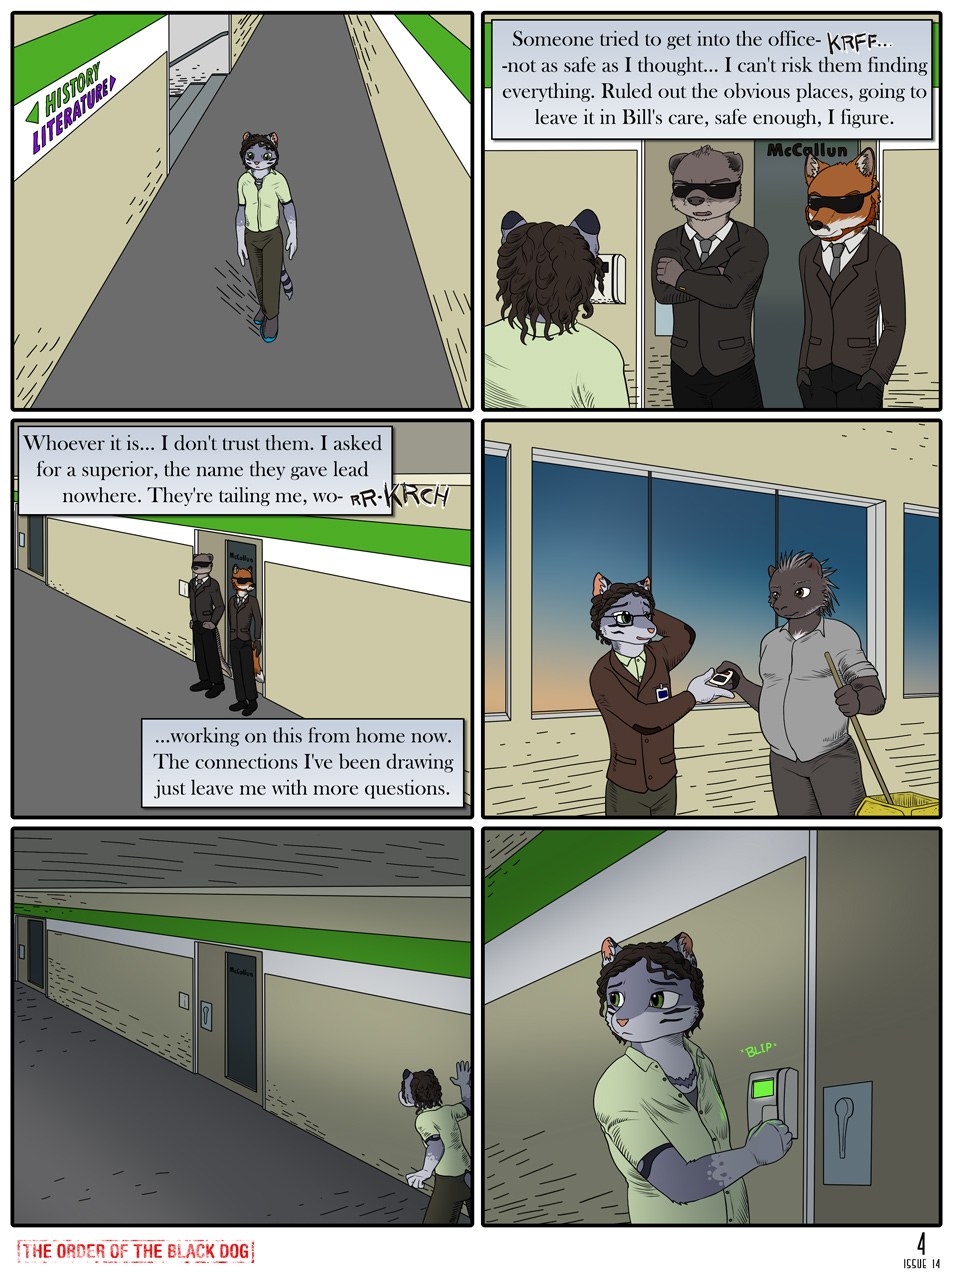 Issue 14, Page 4